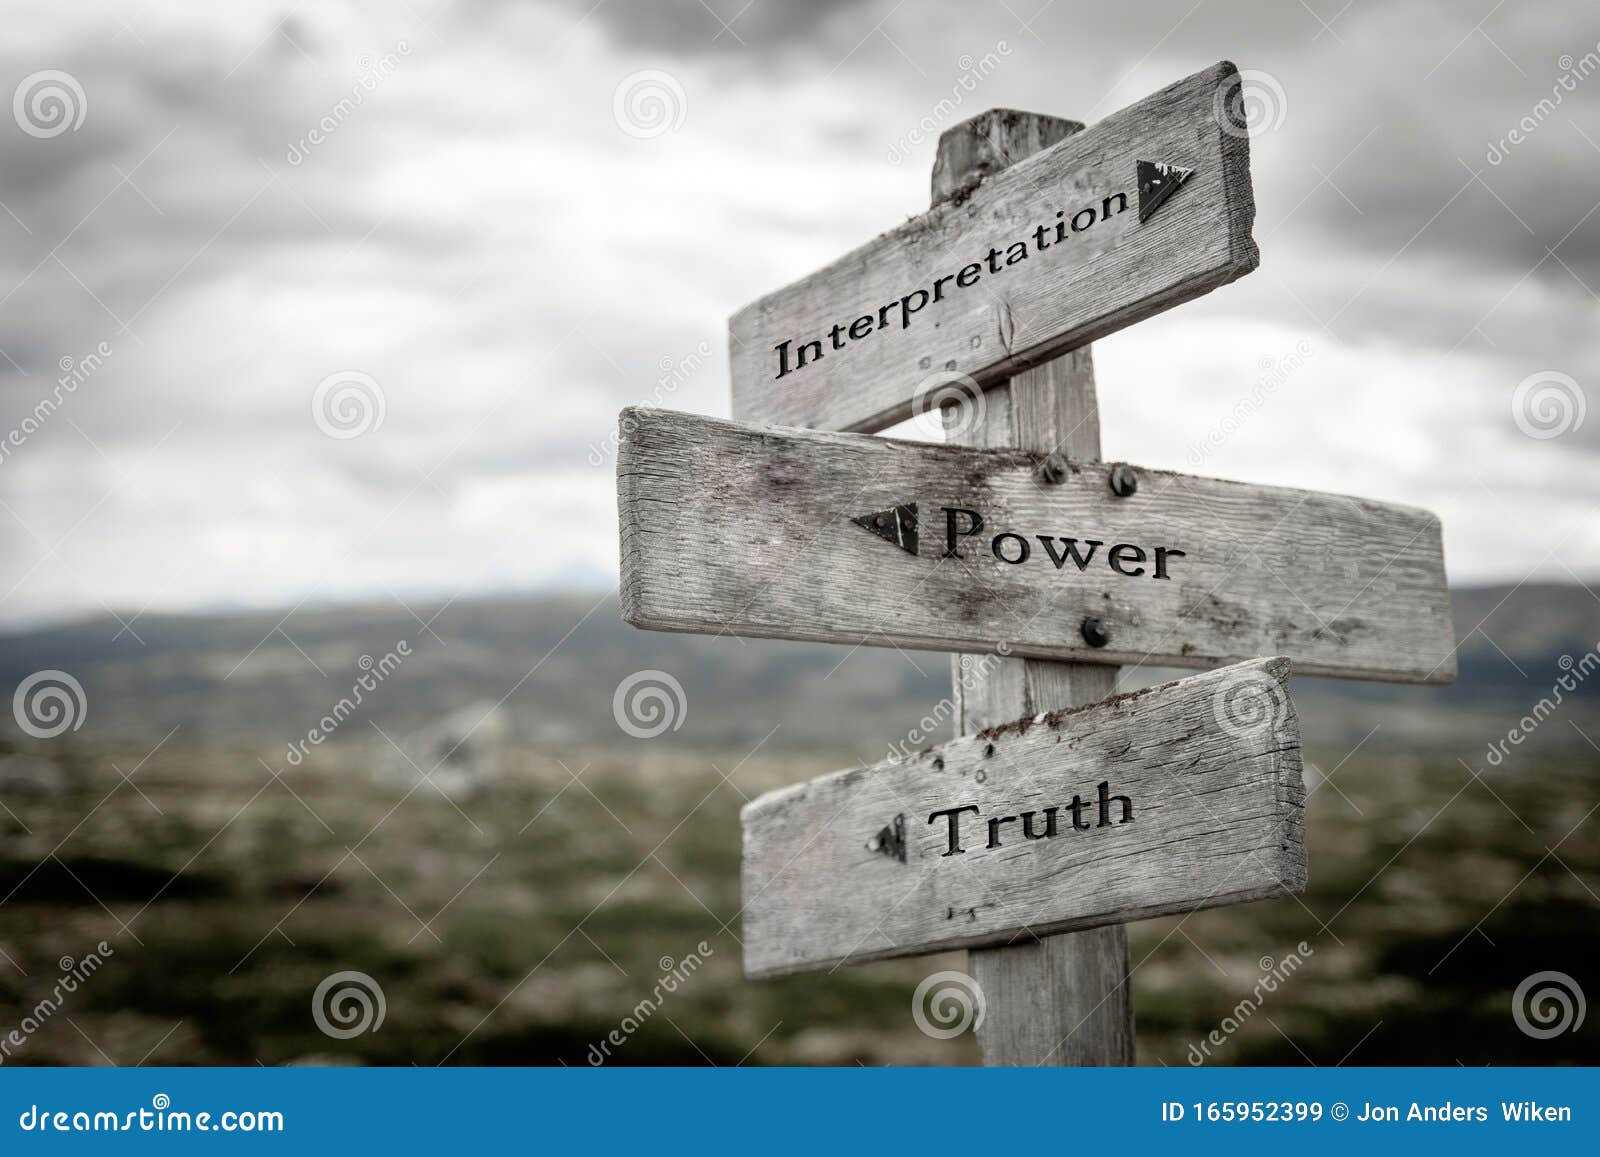 interpretation, power and truth text on wooden rustic signpost outdoors in nature/mountain scenery.